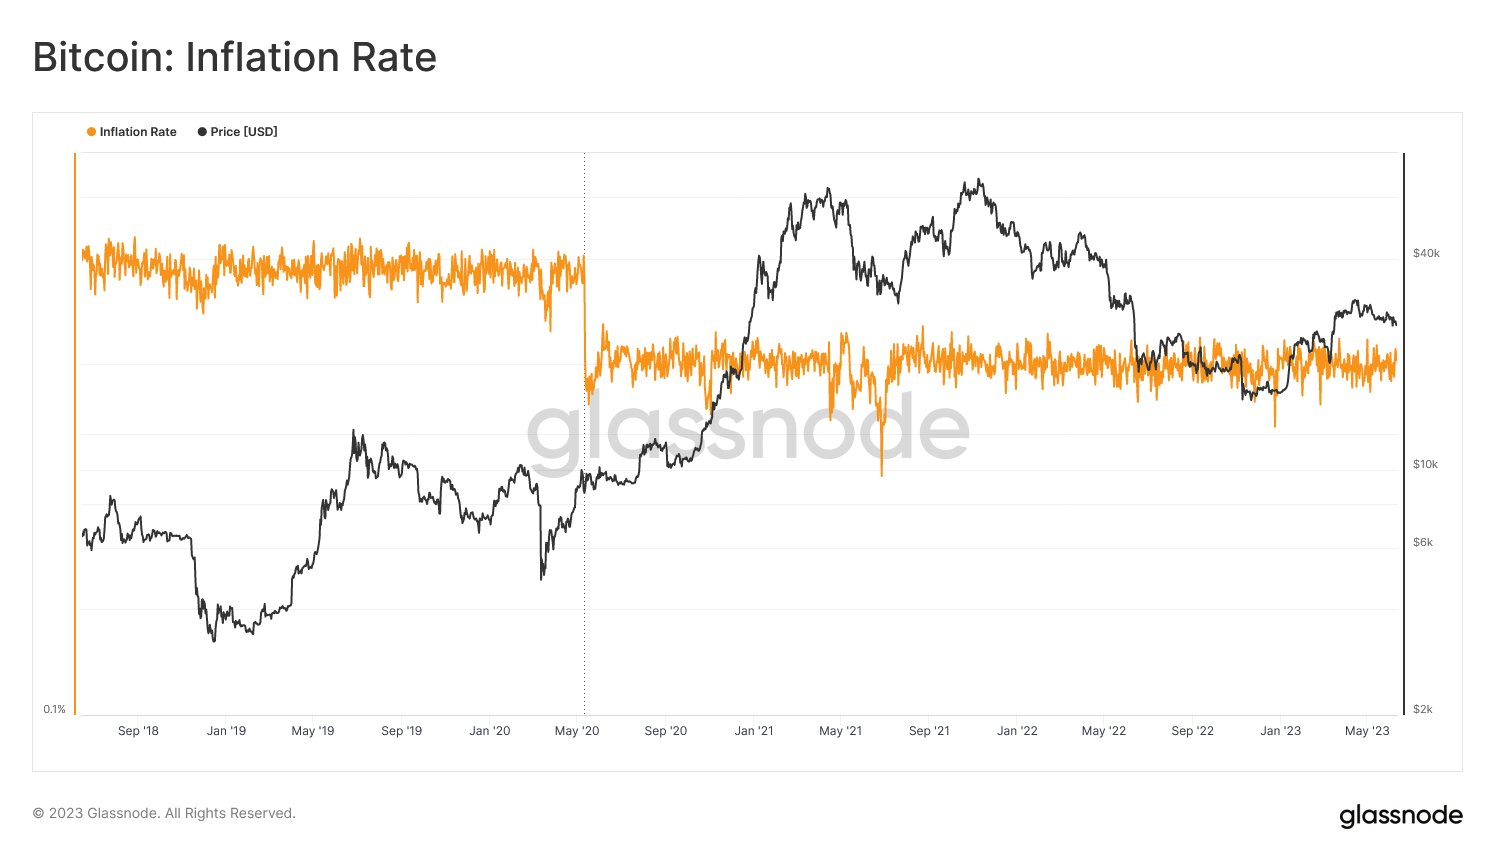 A chart showing the inflation rate of Bitcoin.